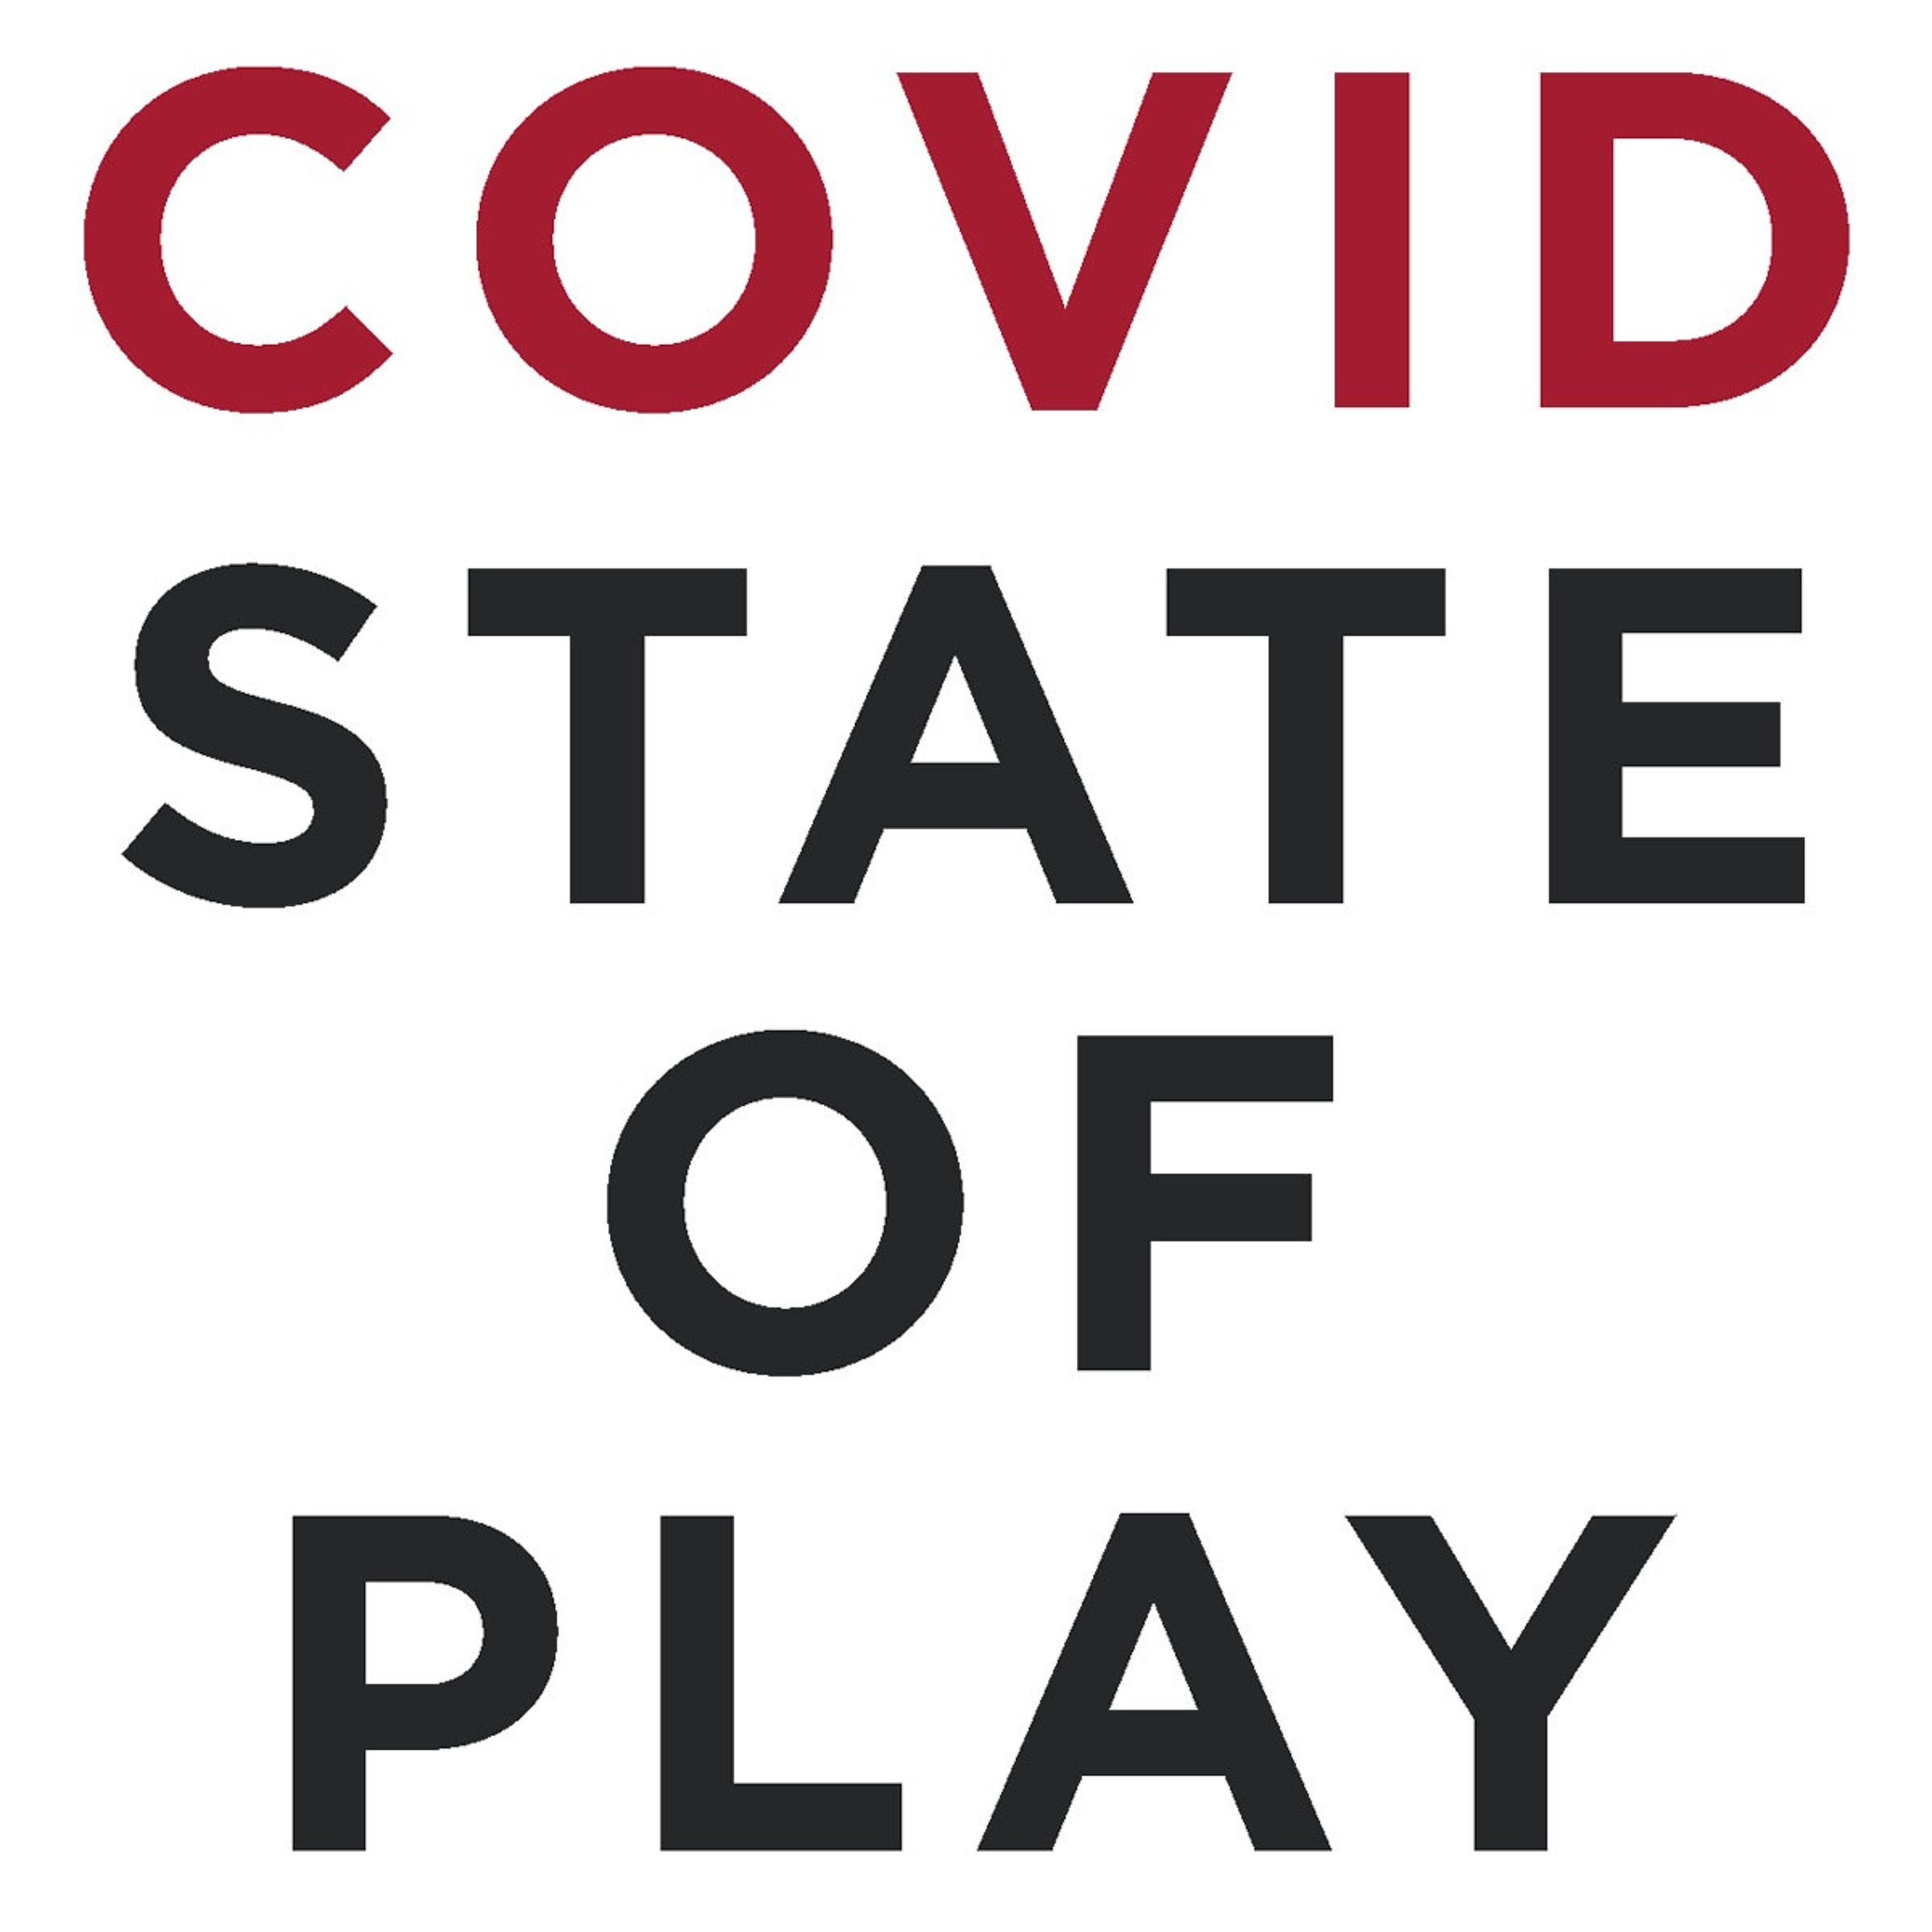 Covid State of Play: 2021 Outlook and Vaccine Disinformation